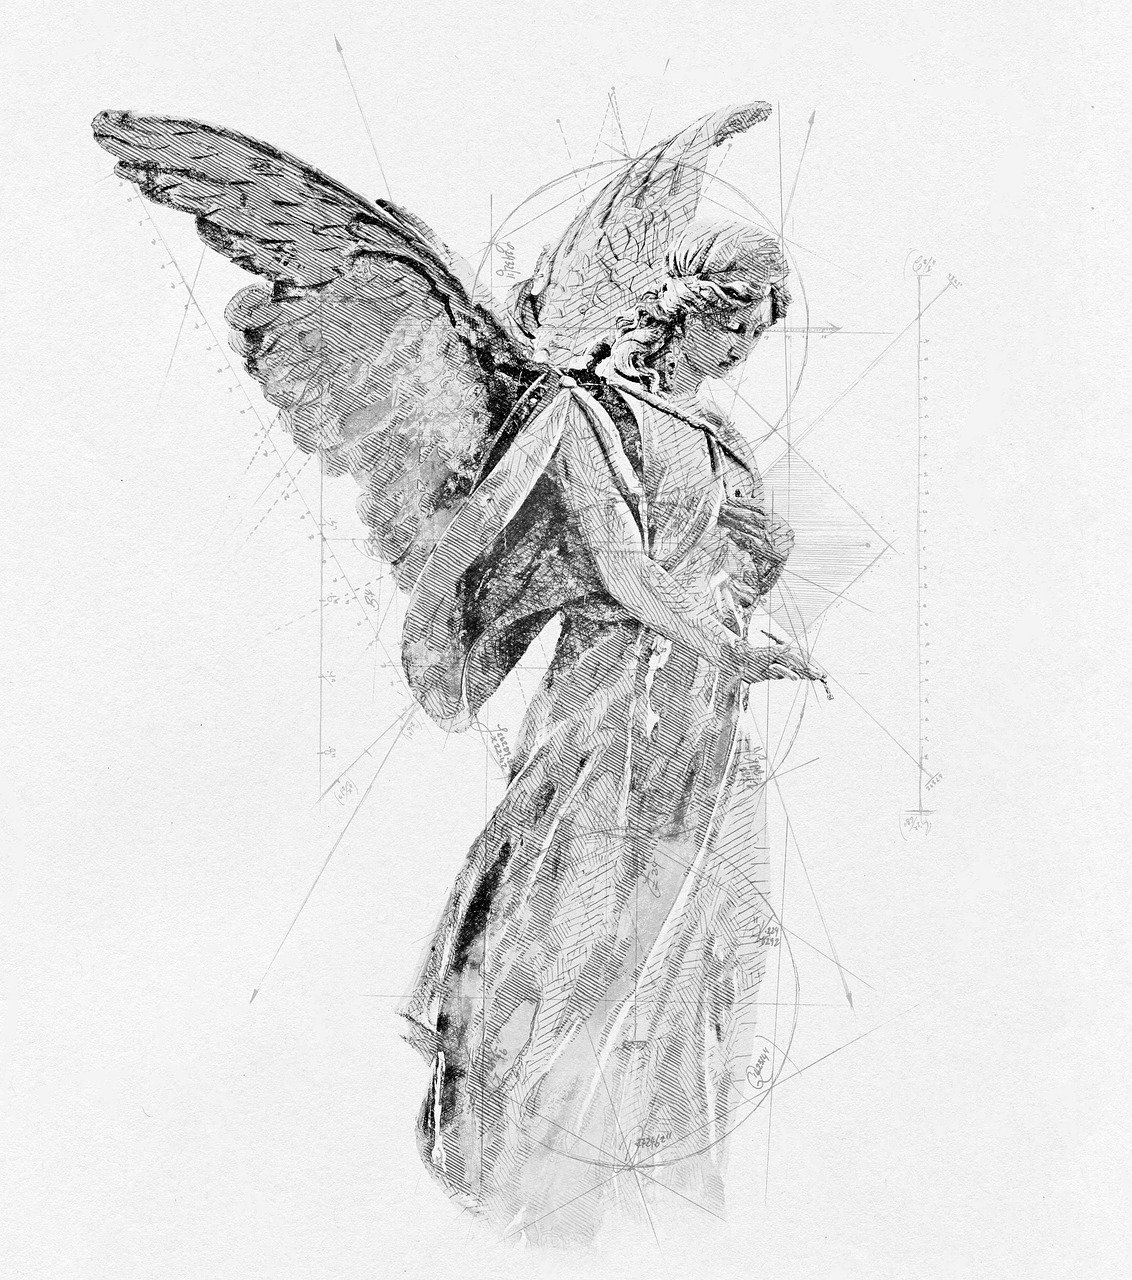 a black and white drawing of an angel, a statue, by Grzegorz Domaradzki, fine art, ellen jewett, illustration in the golden ratio, alexi zaitsev, holly herndon origami statue